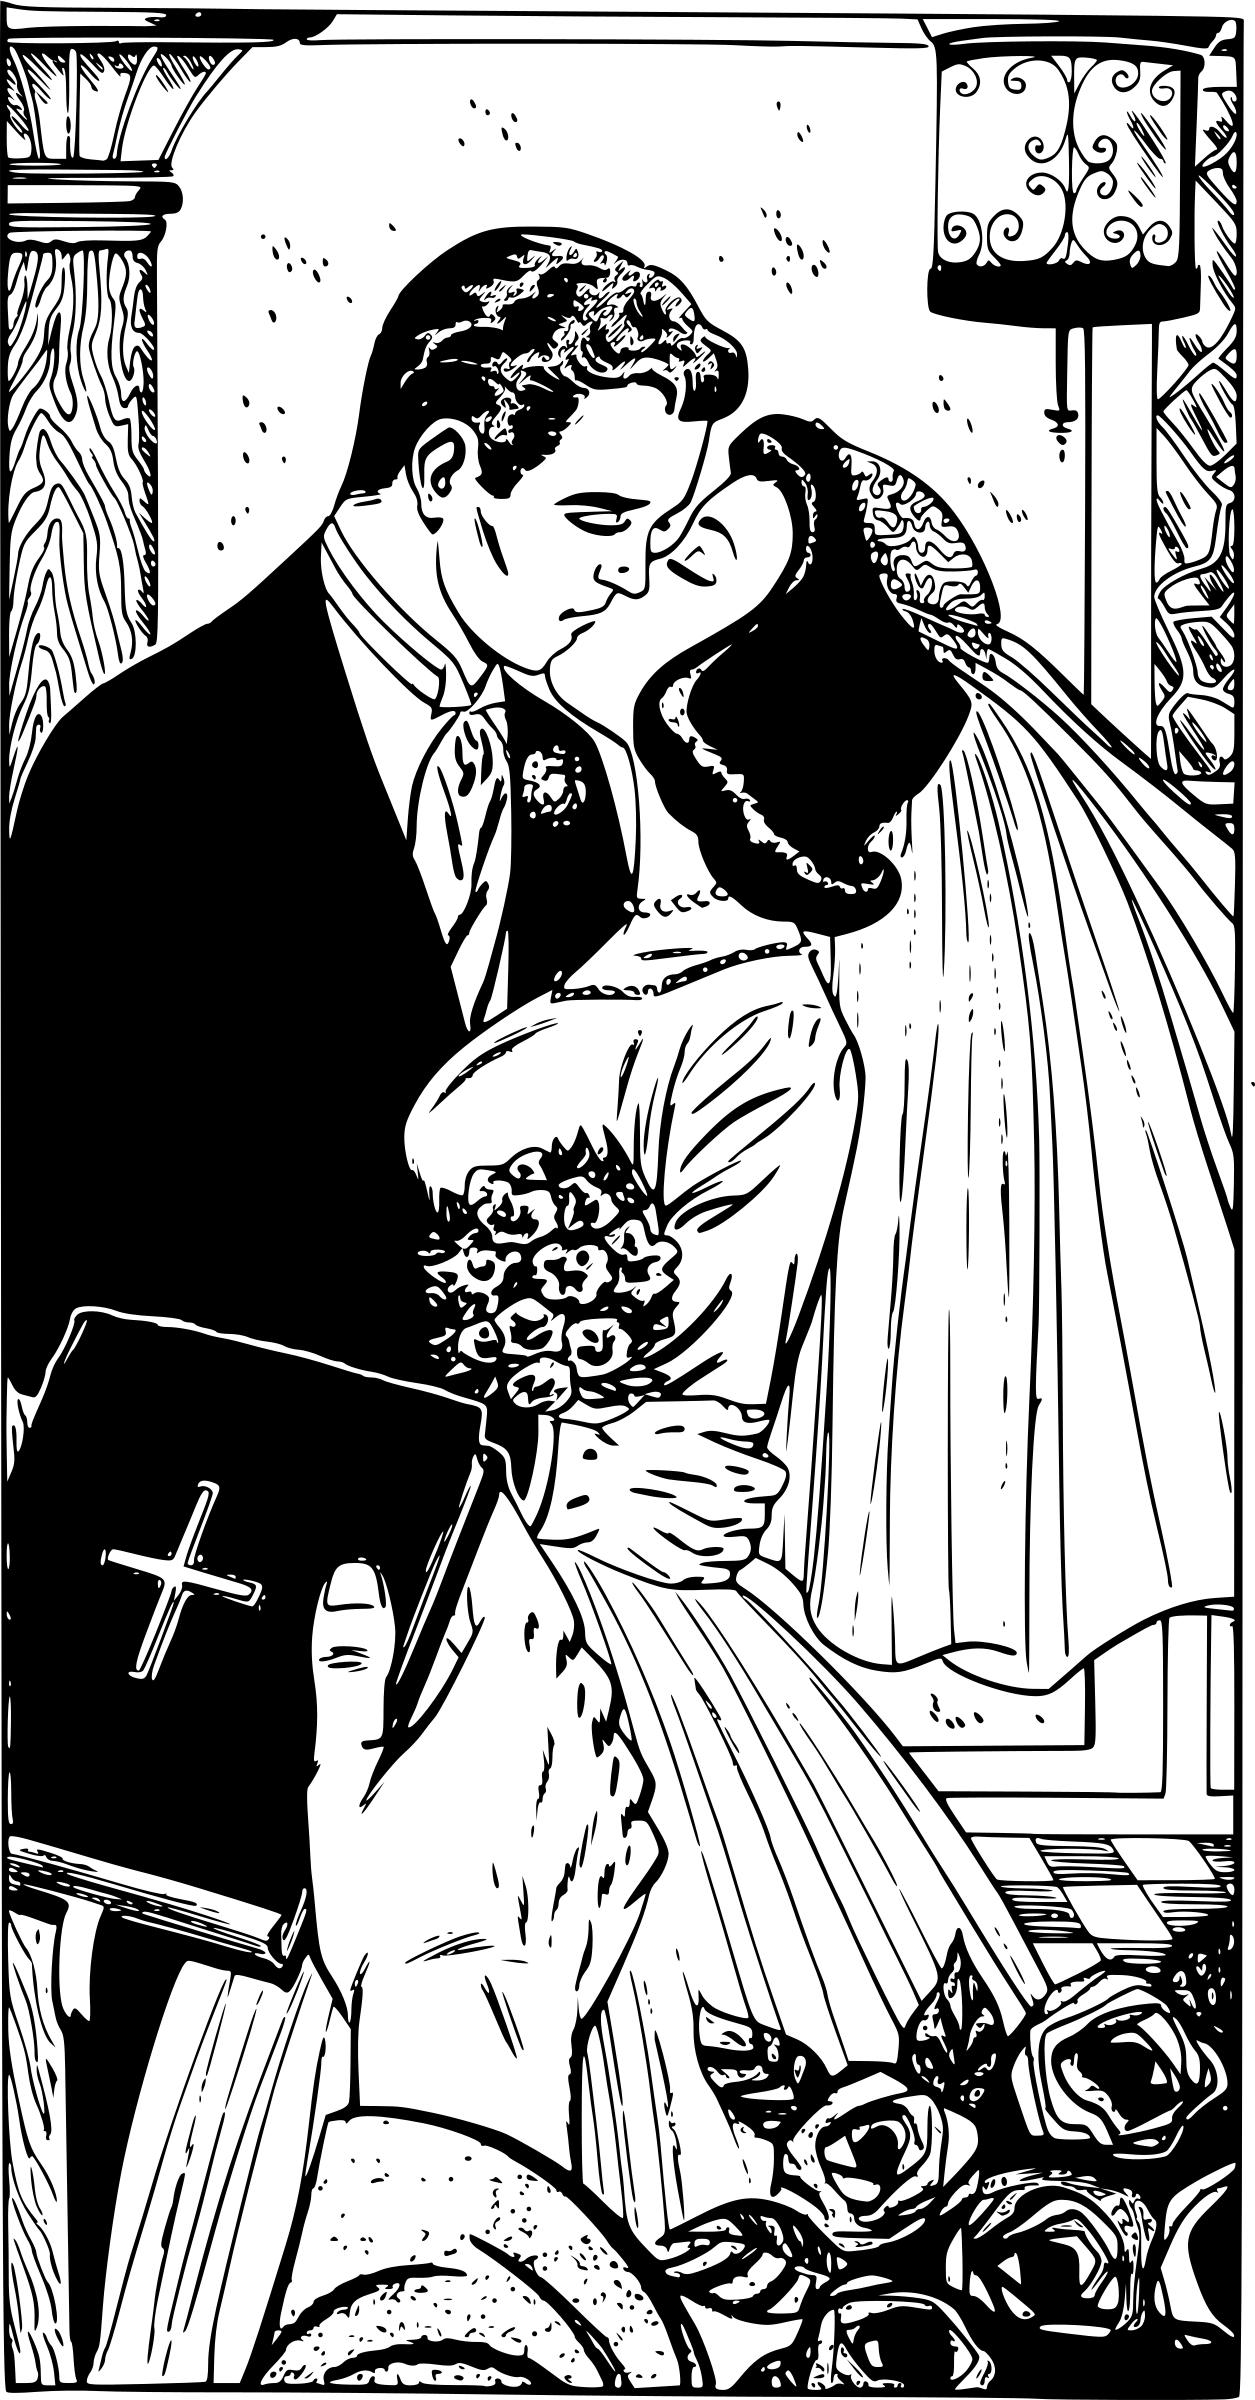 Stereotypical Wedding Kiss png